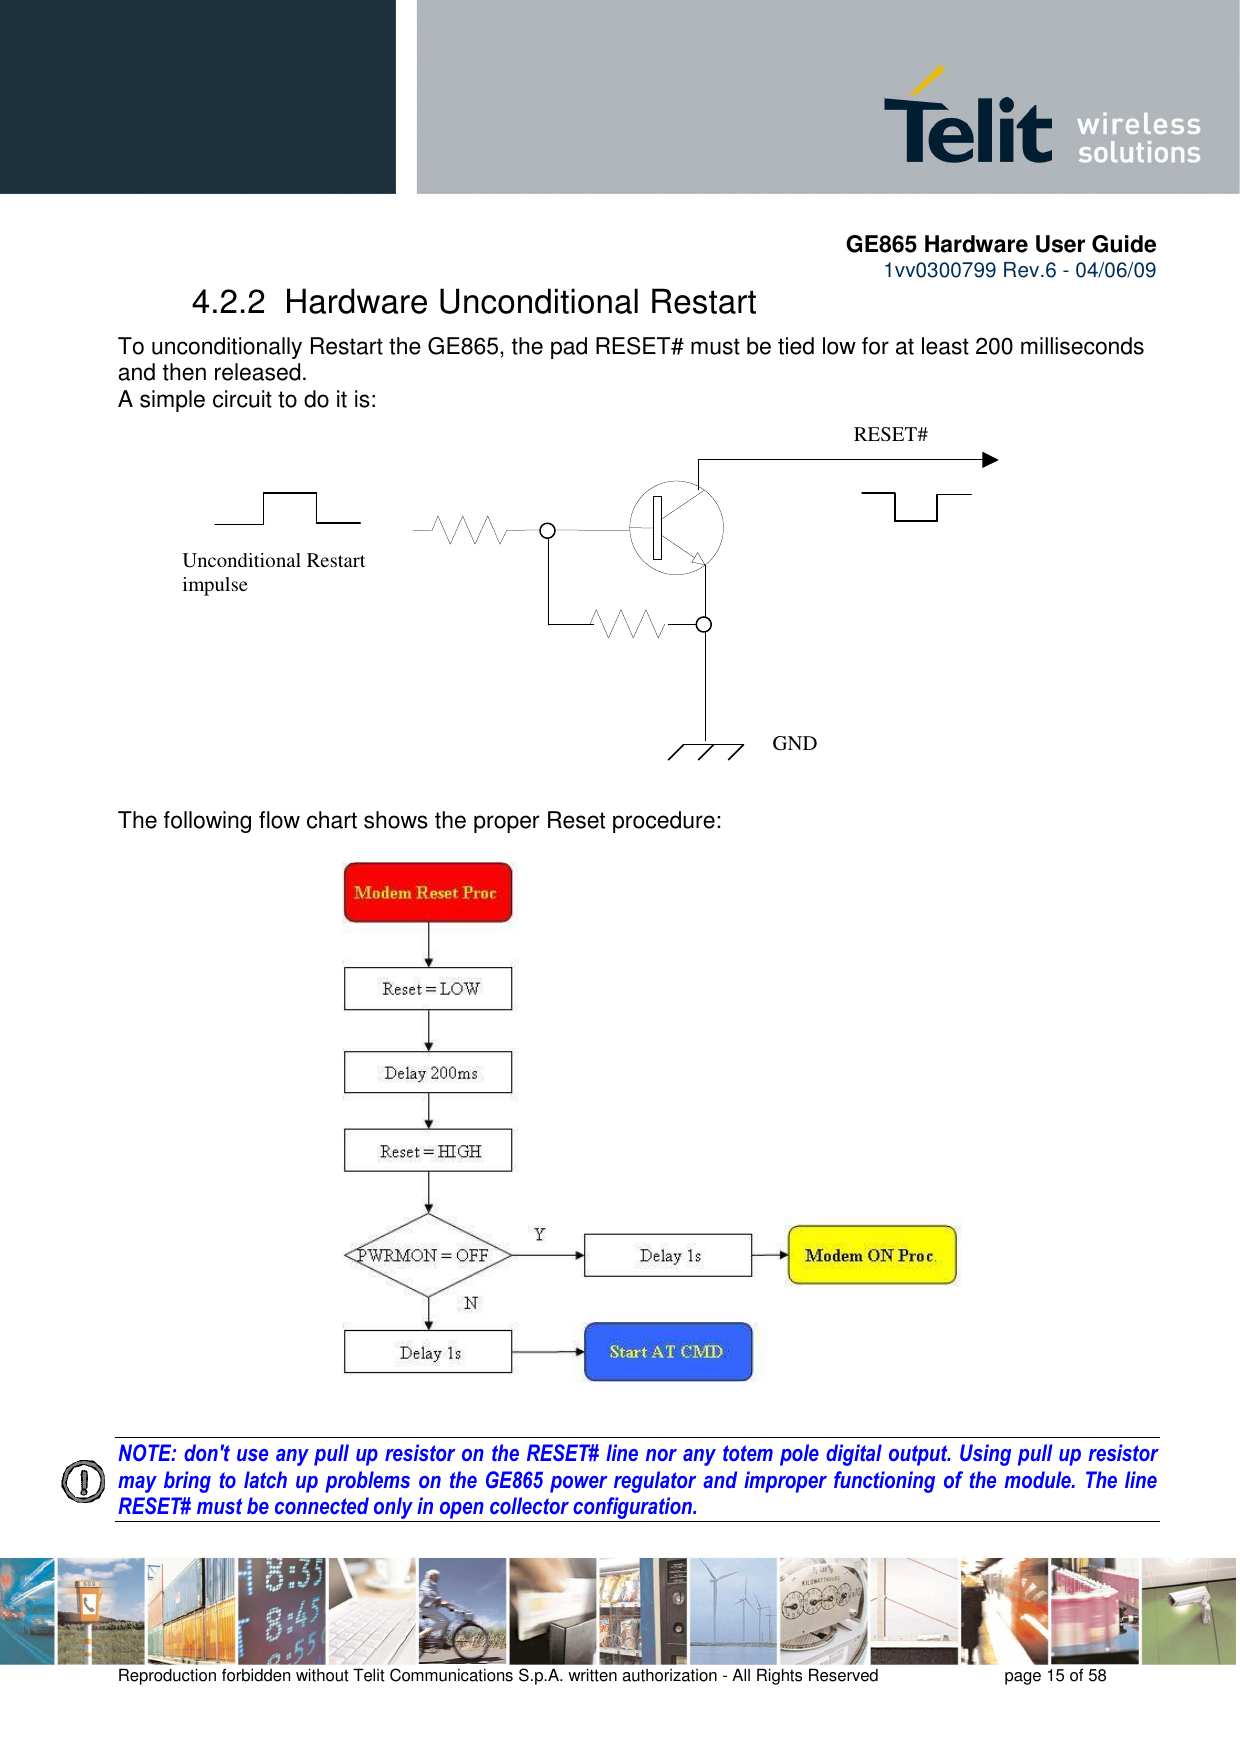       GE865 Hardware User Guide 1vv0300799 Rev.6 - 04/06/09      Reproduction forbidden without Telit Communications S.p.A. written authorization - All Rights Reserved    page 15 of 58  4.2.2  Hardware Unconditional Restart To unconditionally Restart the GE865, the pad RESET# must be tied low for at least 200 milliseconds and then released. A simple circuit to do it is:                The following flow chart shows the proper Reset procedure:                        NOTE: don&apos;t use any pull up resistor on the RESET# line nor any totem pole digital output. Using pull up resistor may bring to latch  up problems on the GE865  power regulator and improper functioning of  the module. The line RESET# must be connected only in open collector configuration.    RESET# Unconditional Restart impulse   GND 